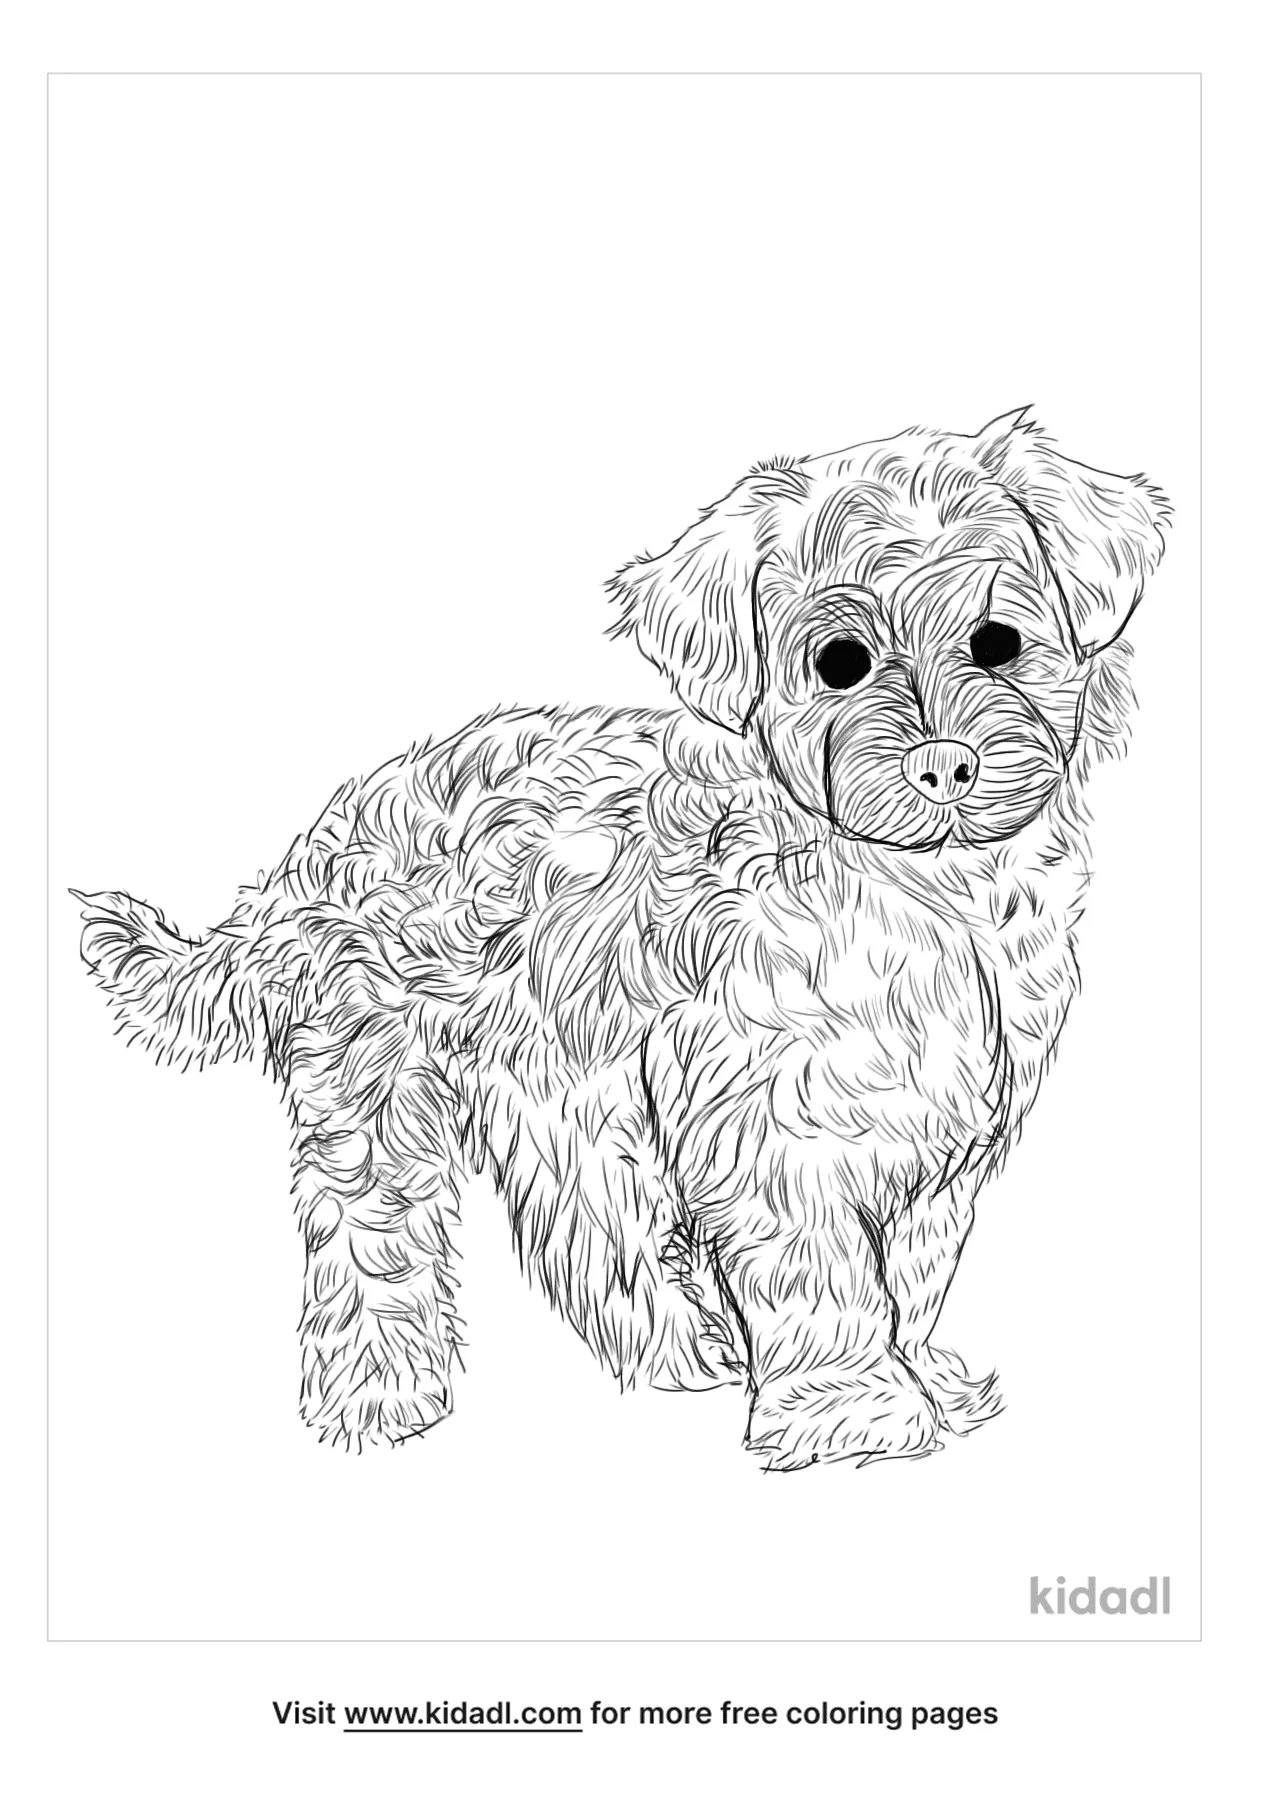 Maltipoo Coloring Page   Free Dogs Coloring Page   Kidadl